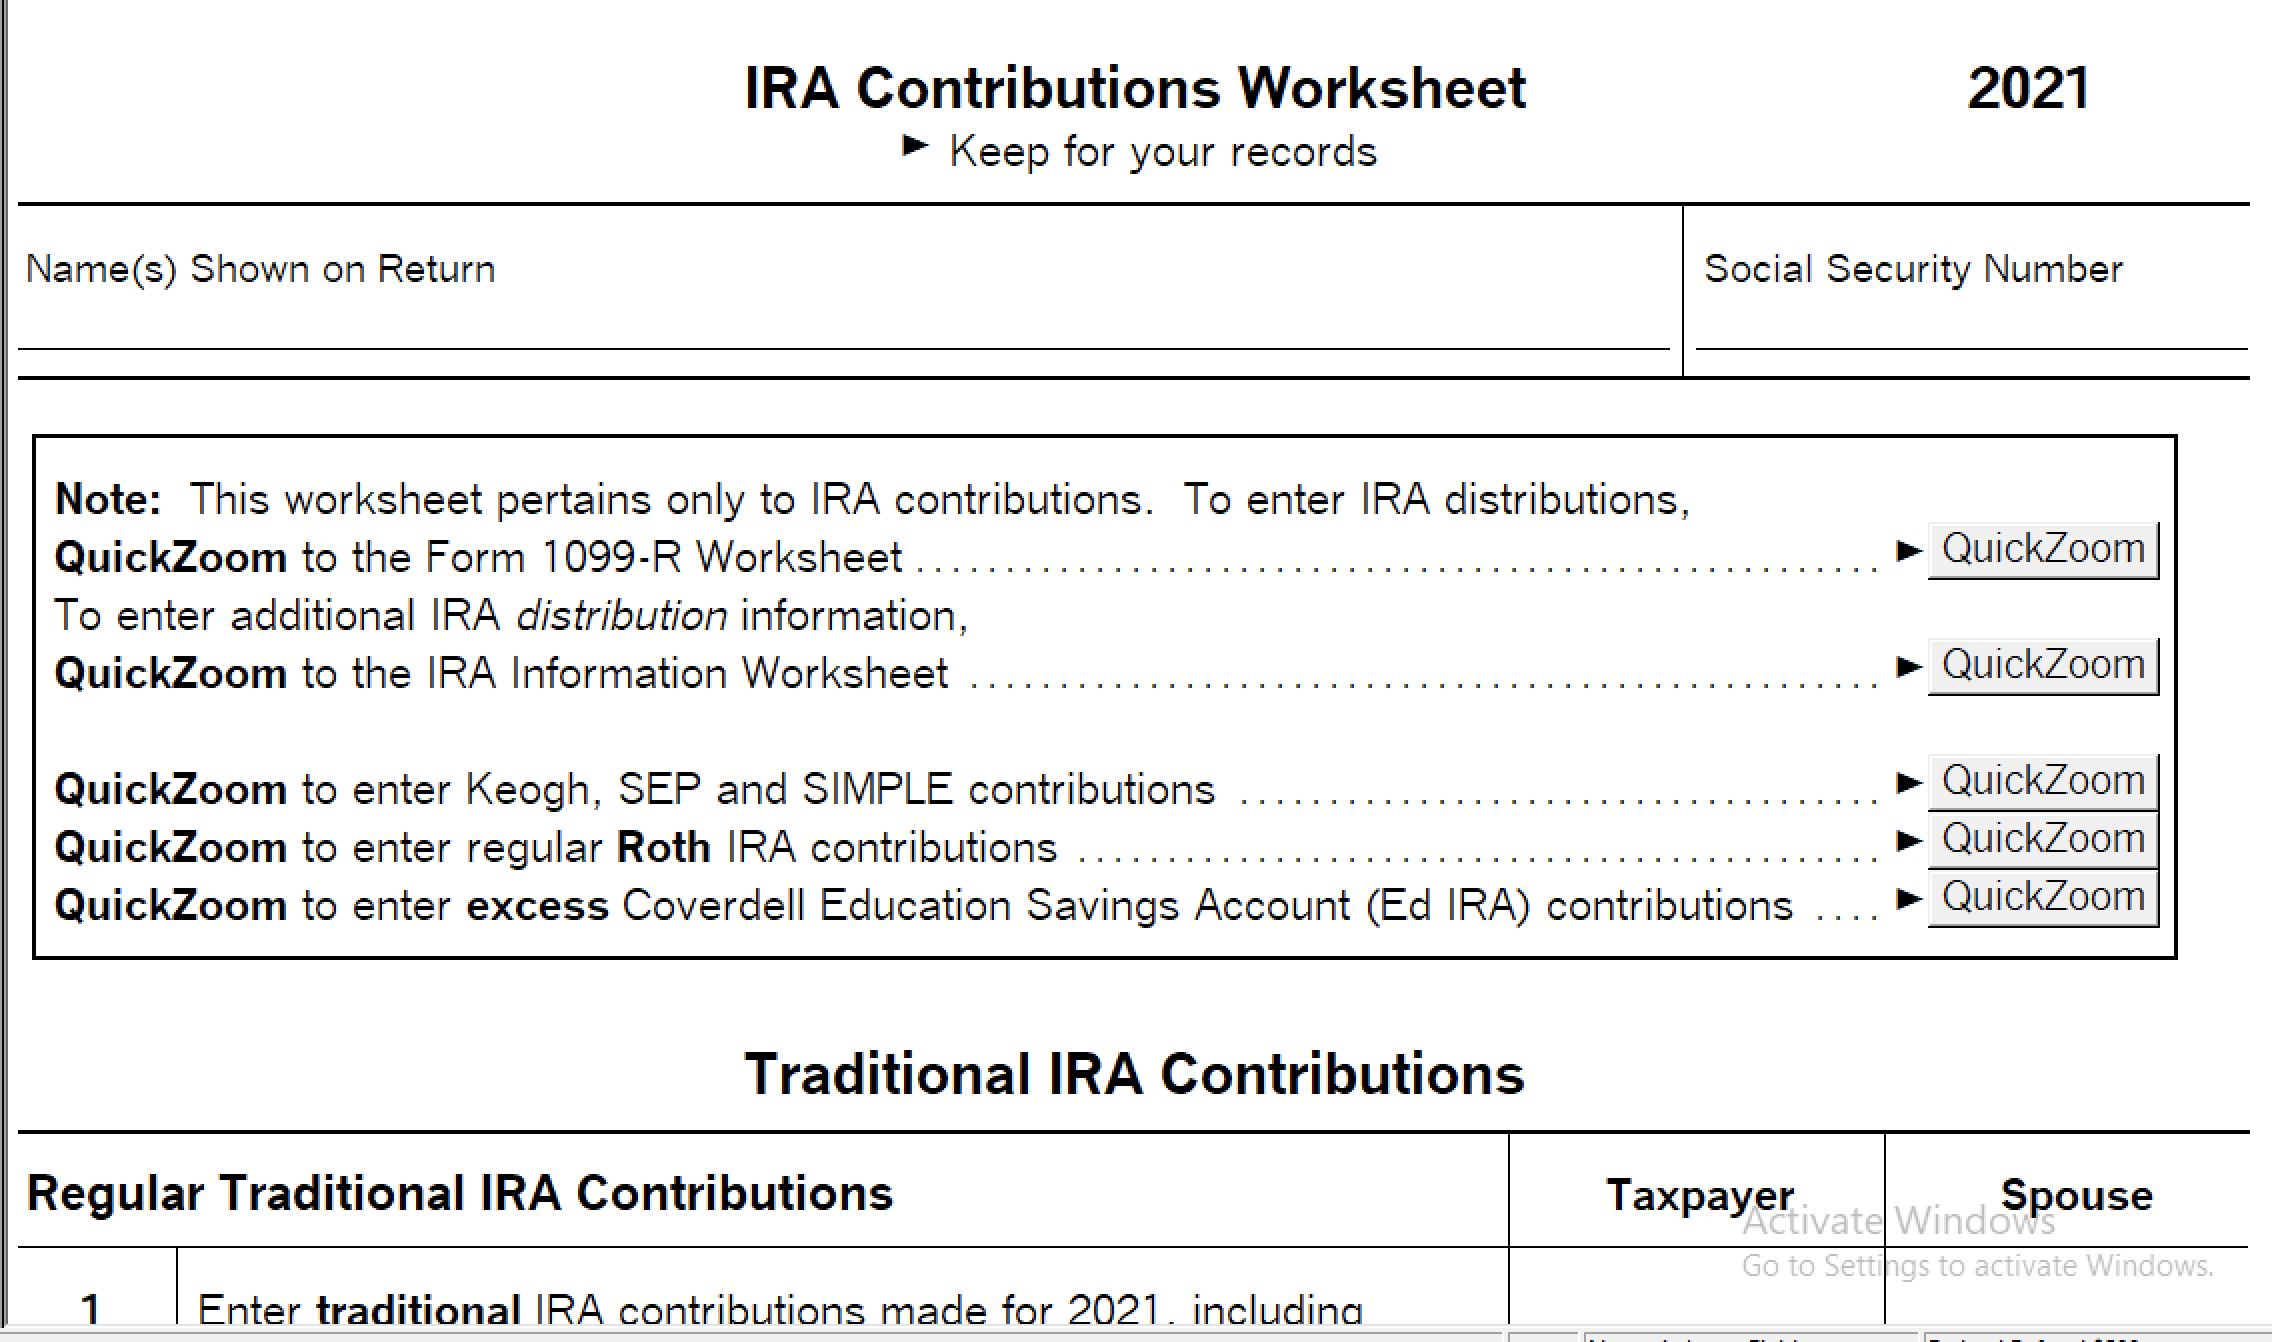 ira-contributions-proseries.png